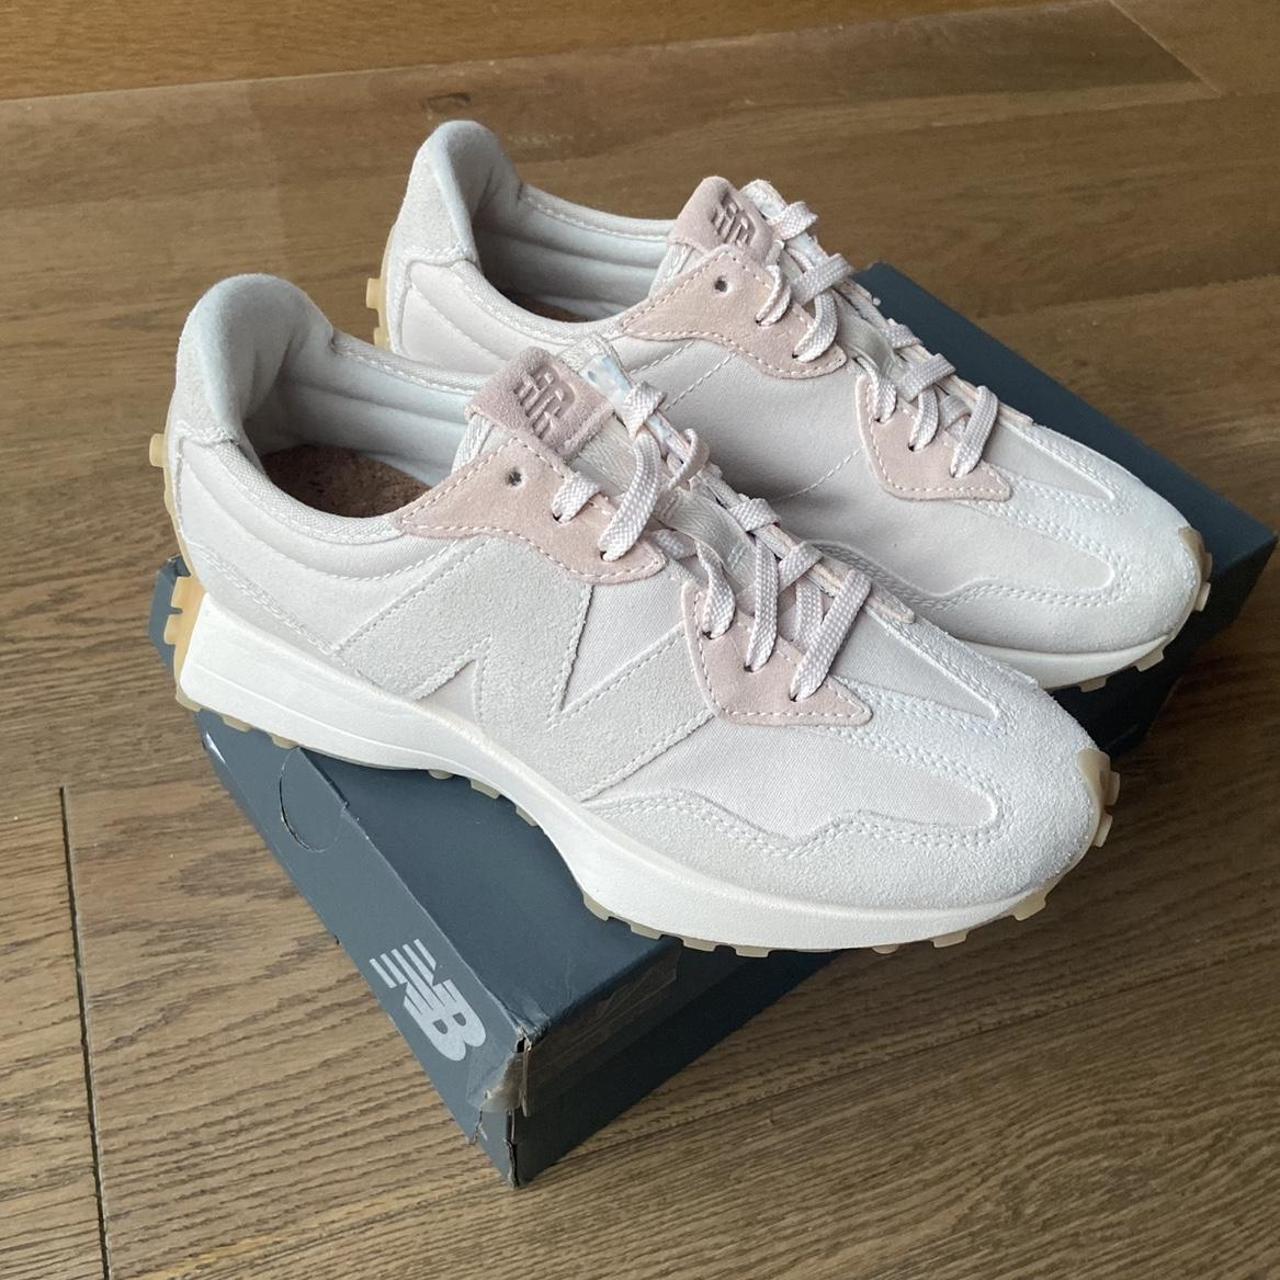 New Balance 327 trainers in cream neutral rose /... - Depop